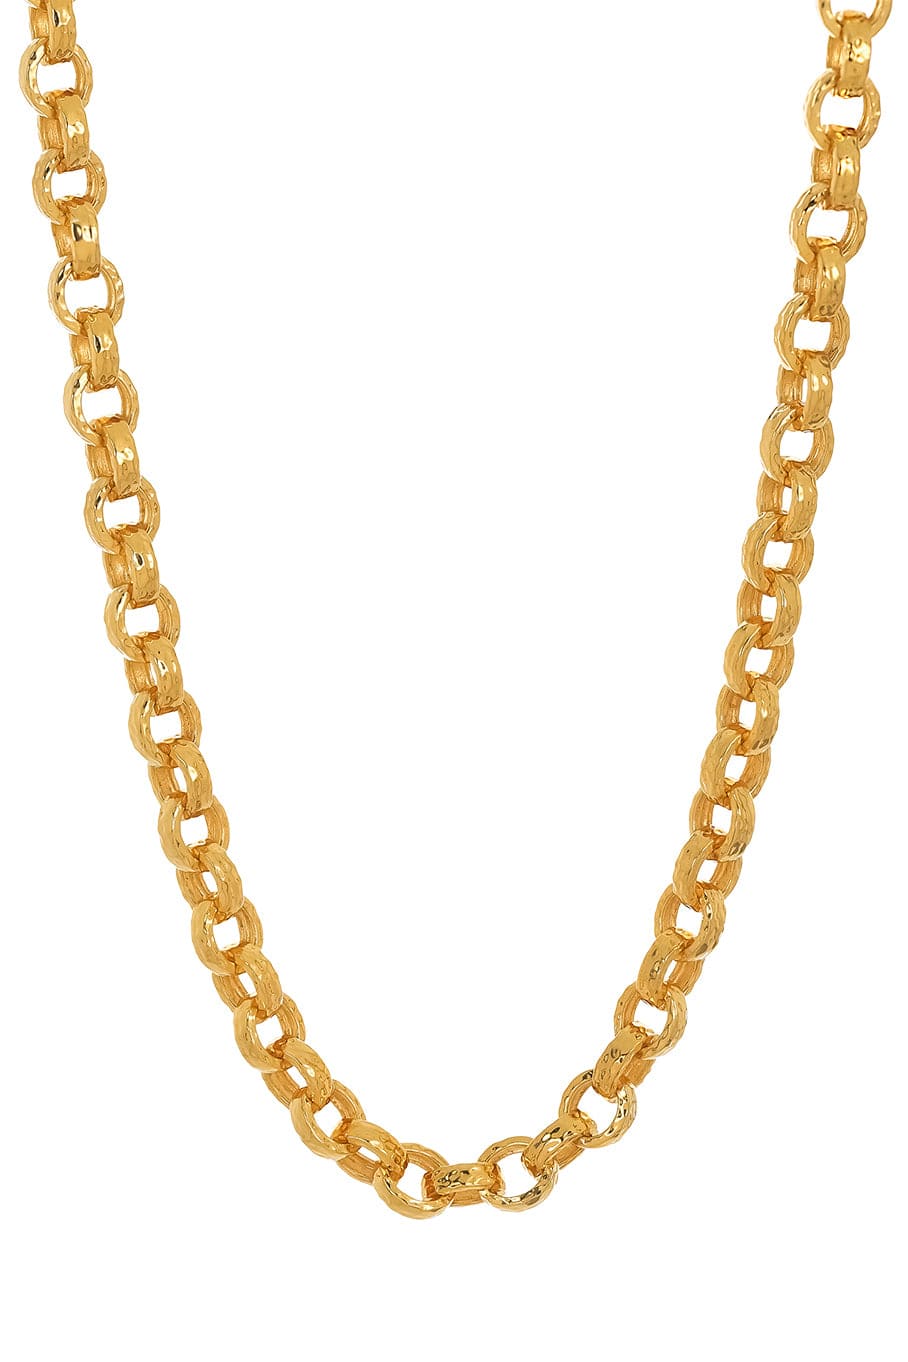 BUDDHA MAMA-7mm Hammered Link Necklace - 18"-YELLOW GOLD